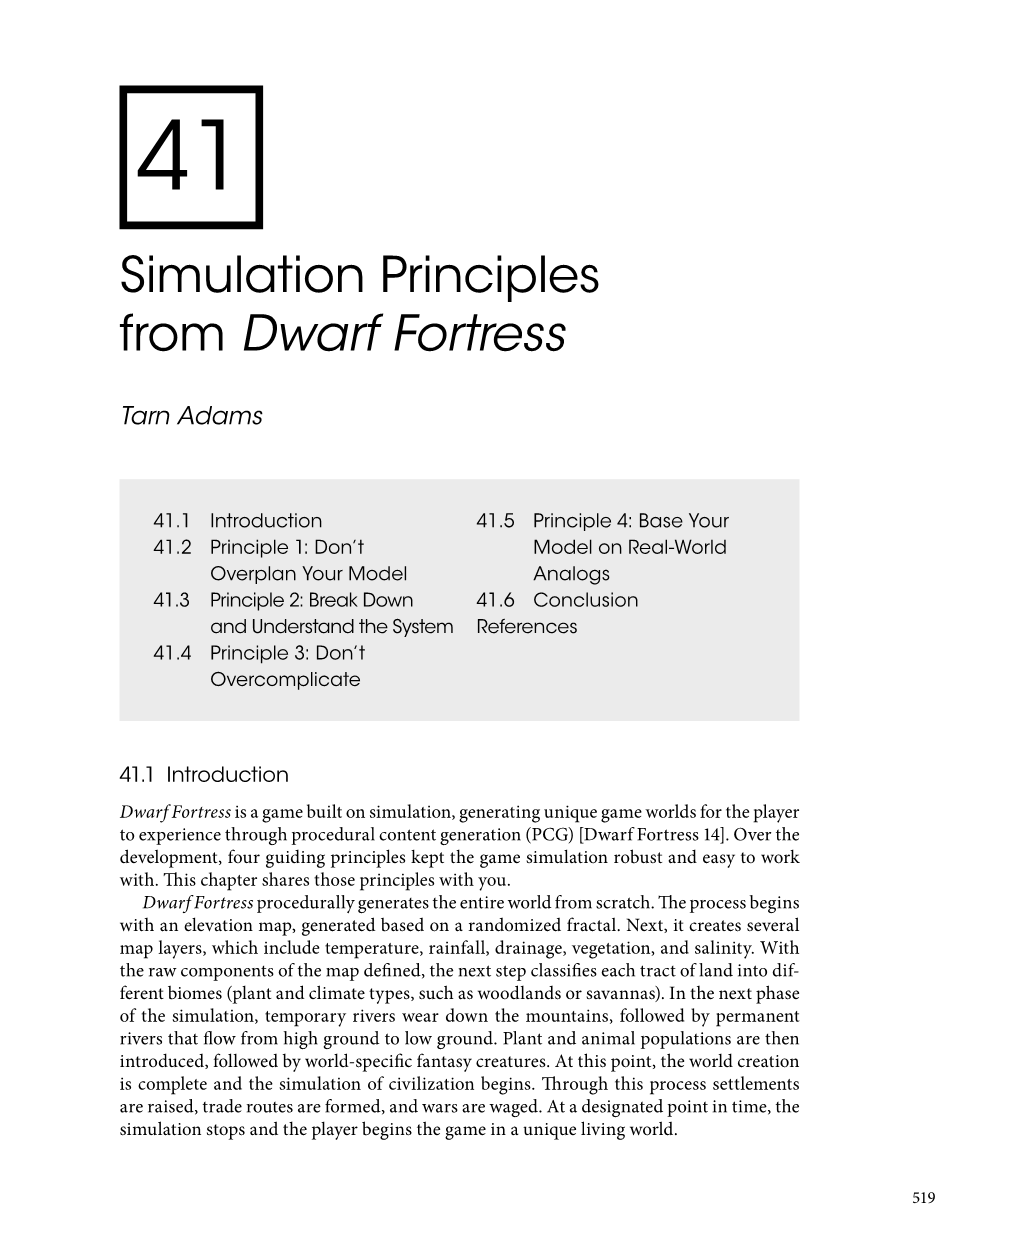 Simulation Principles from Dwarf Fortress